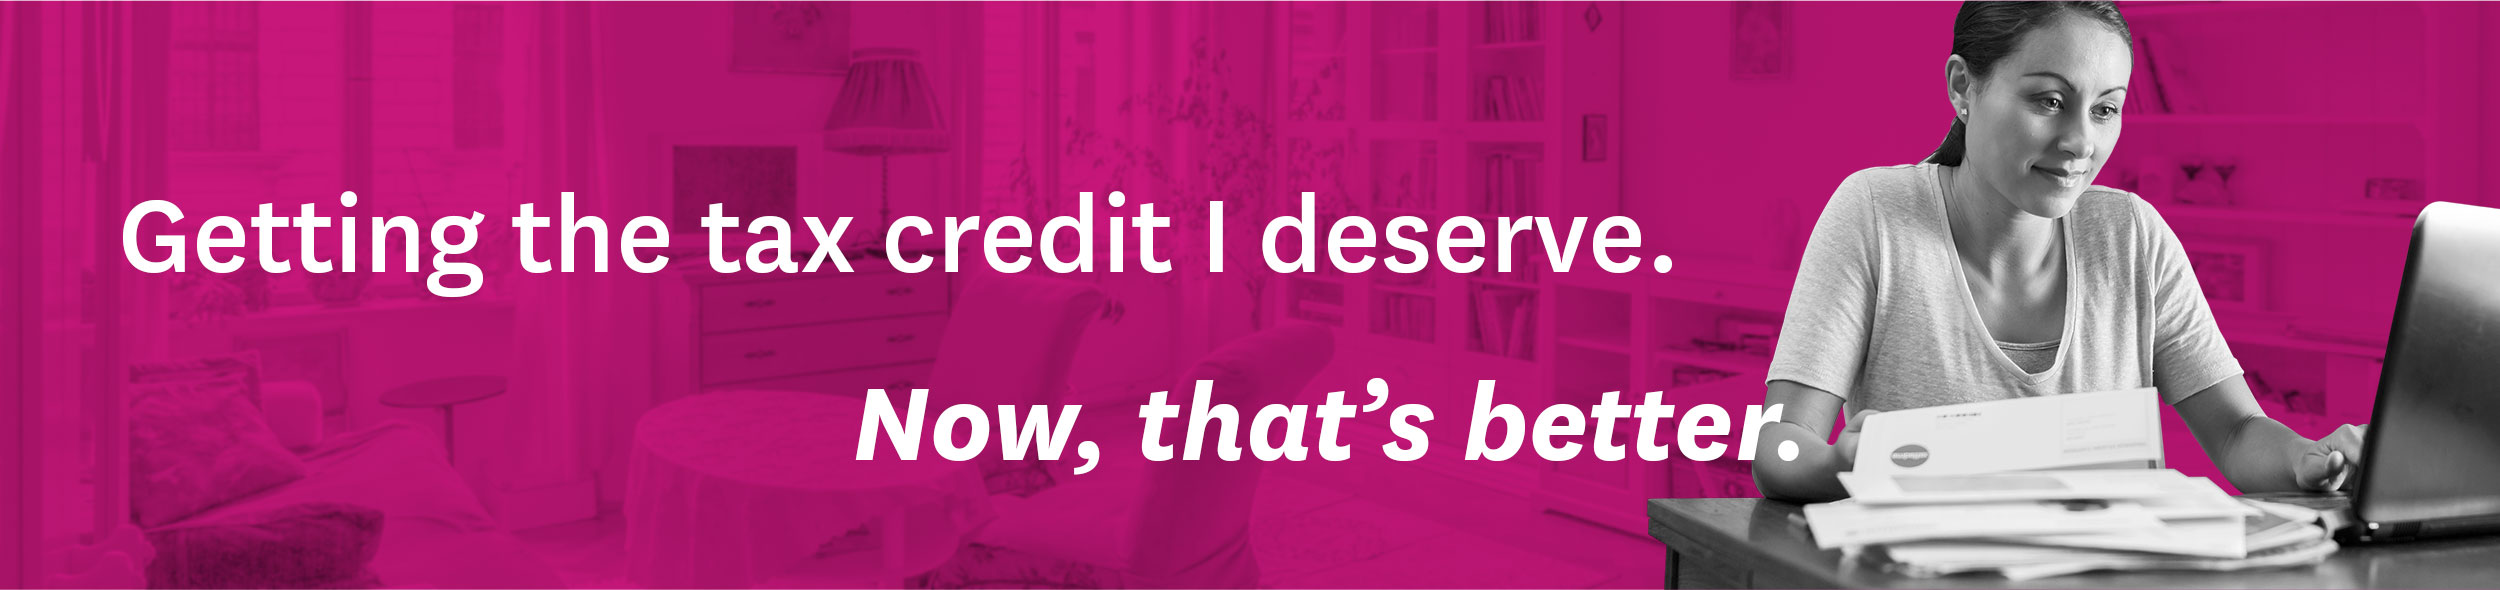 Getting the tax credit I deserve. Now, that’s better.